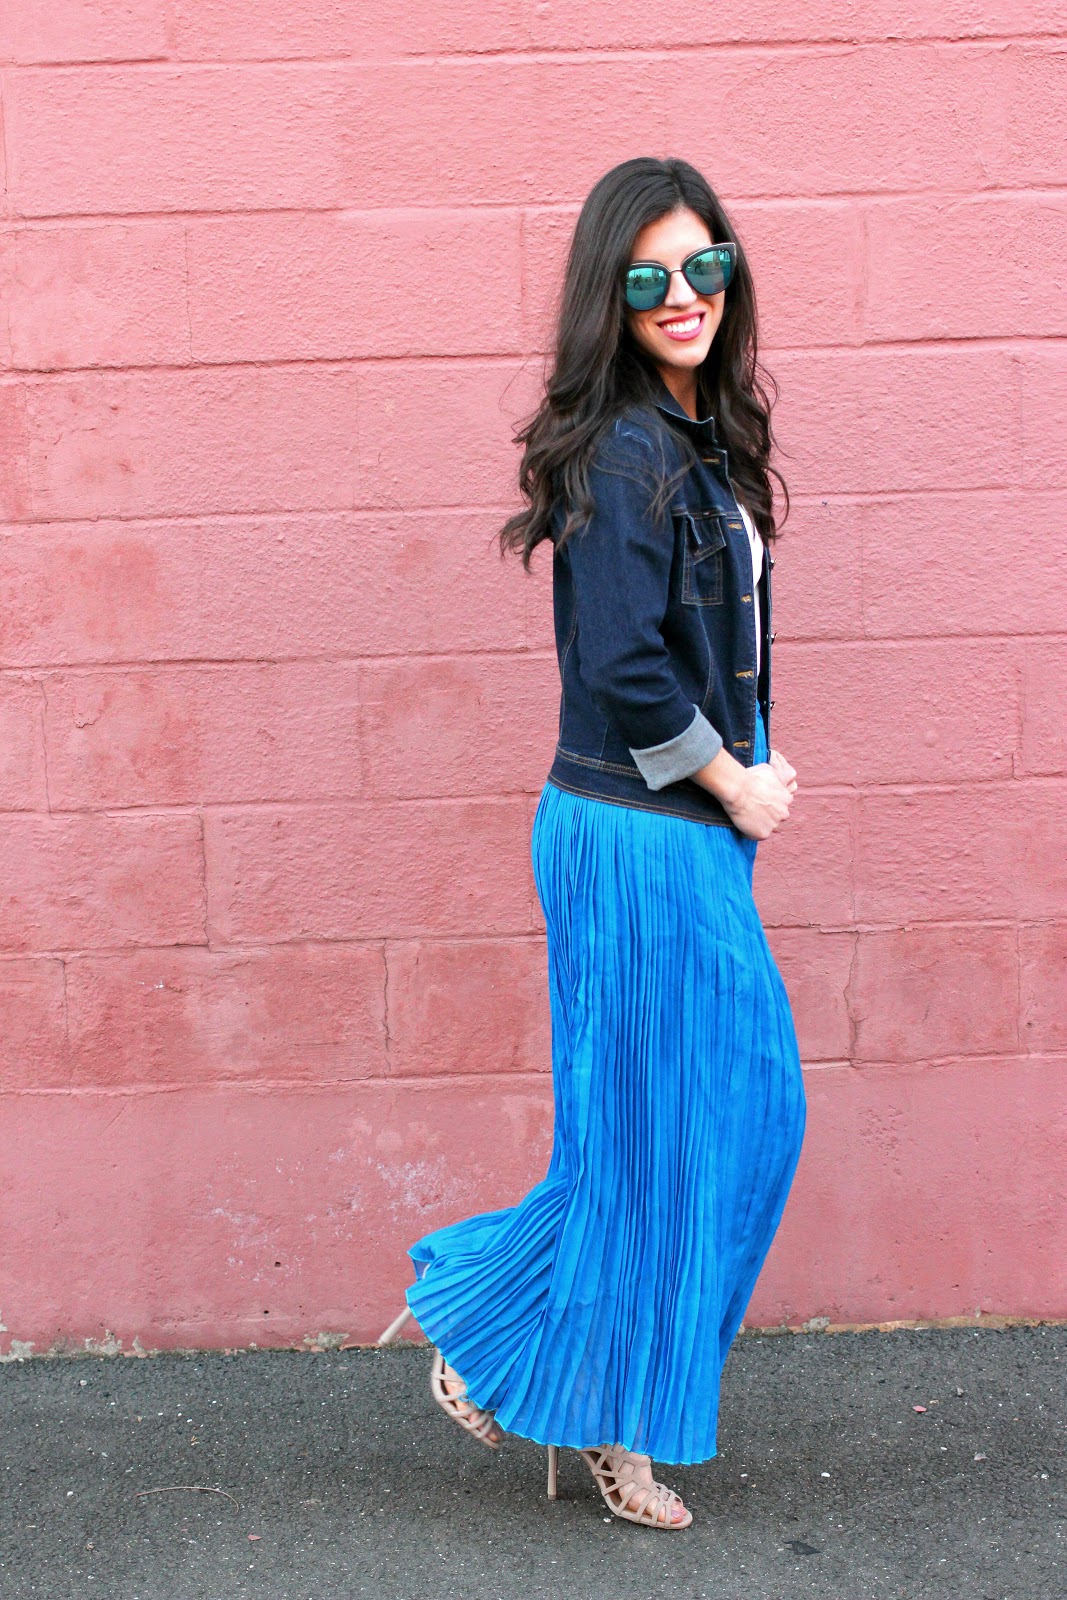 Beautifully Candid: Maxi Pleated Skirt and Denim Jacket